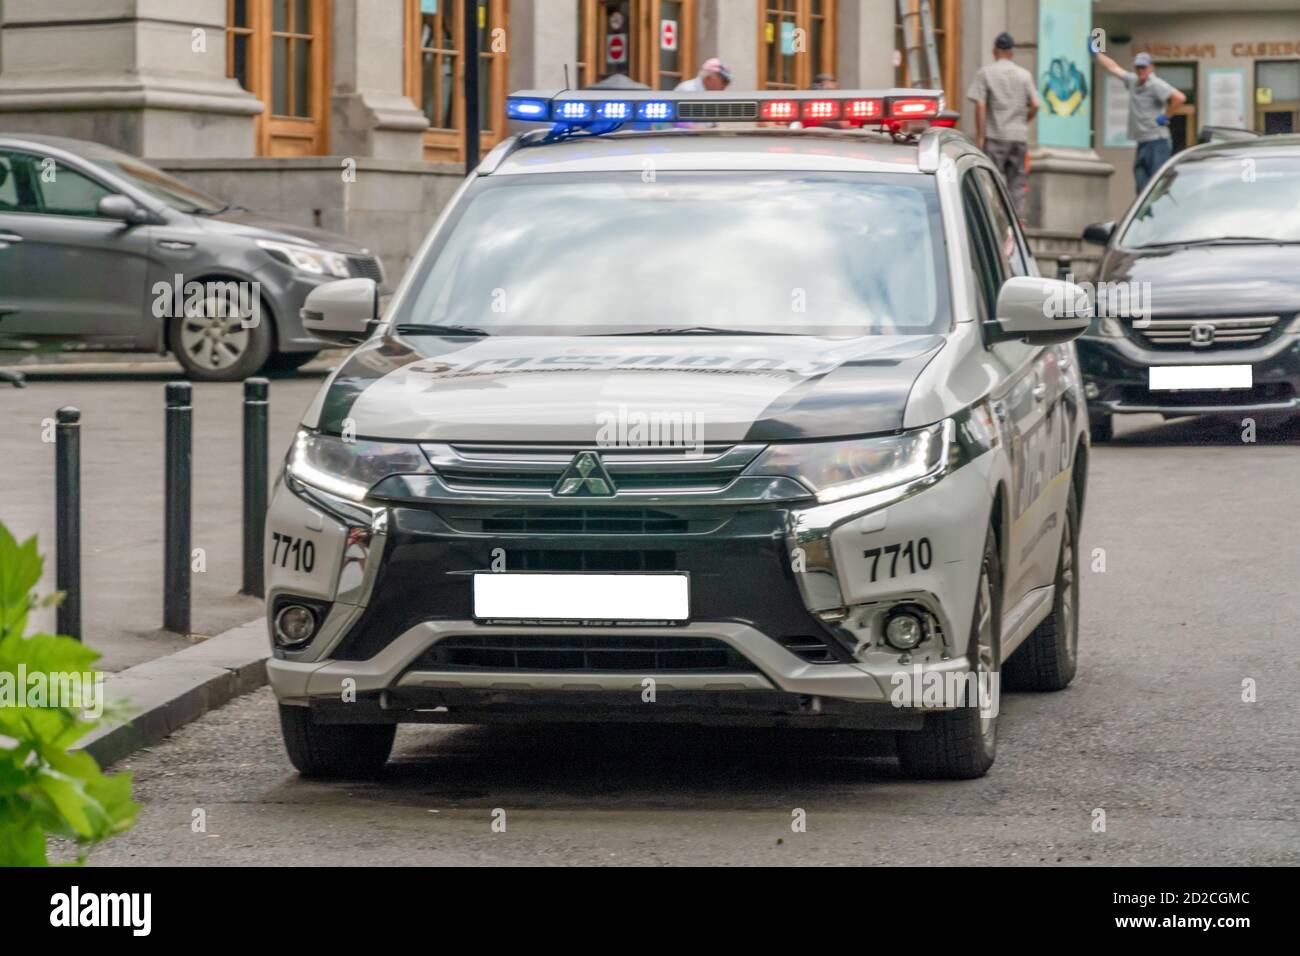 Tbilisi, Georgia - June 28, 2019: police car with included beacons on an asphalt road in the city on a sunny clear day Stock Photo